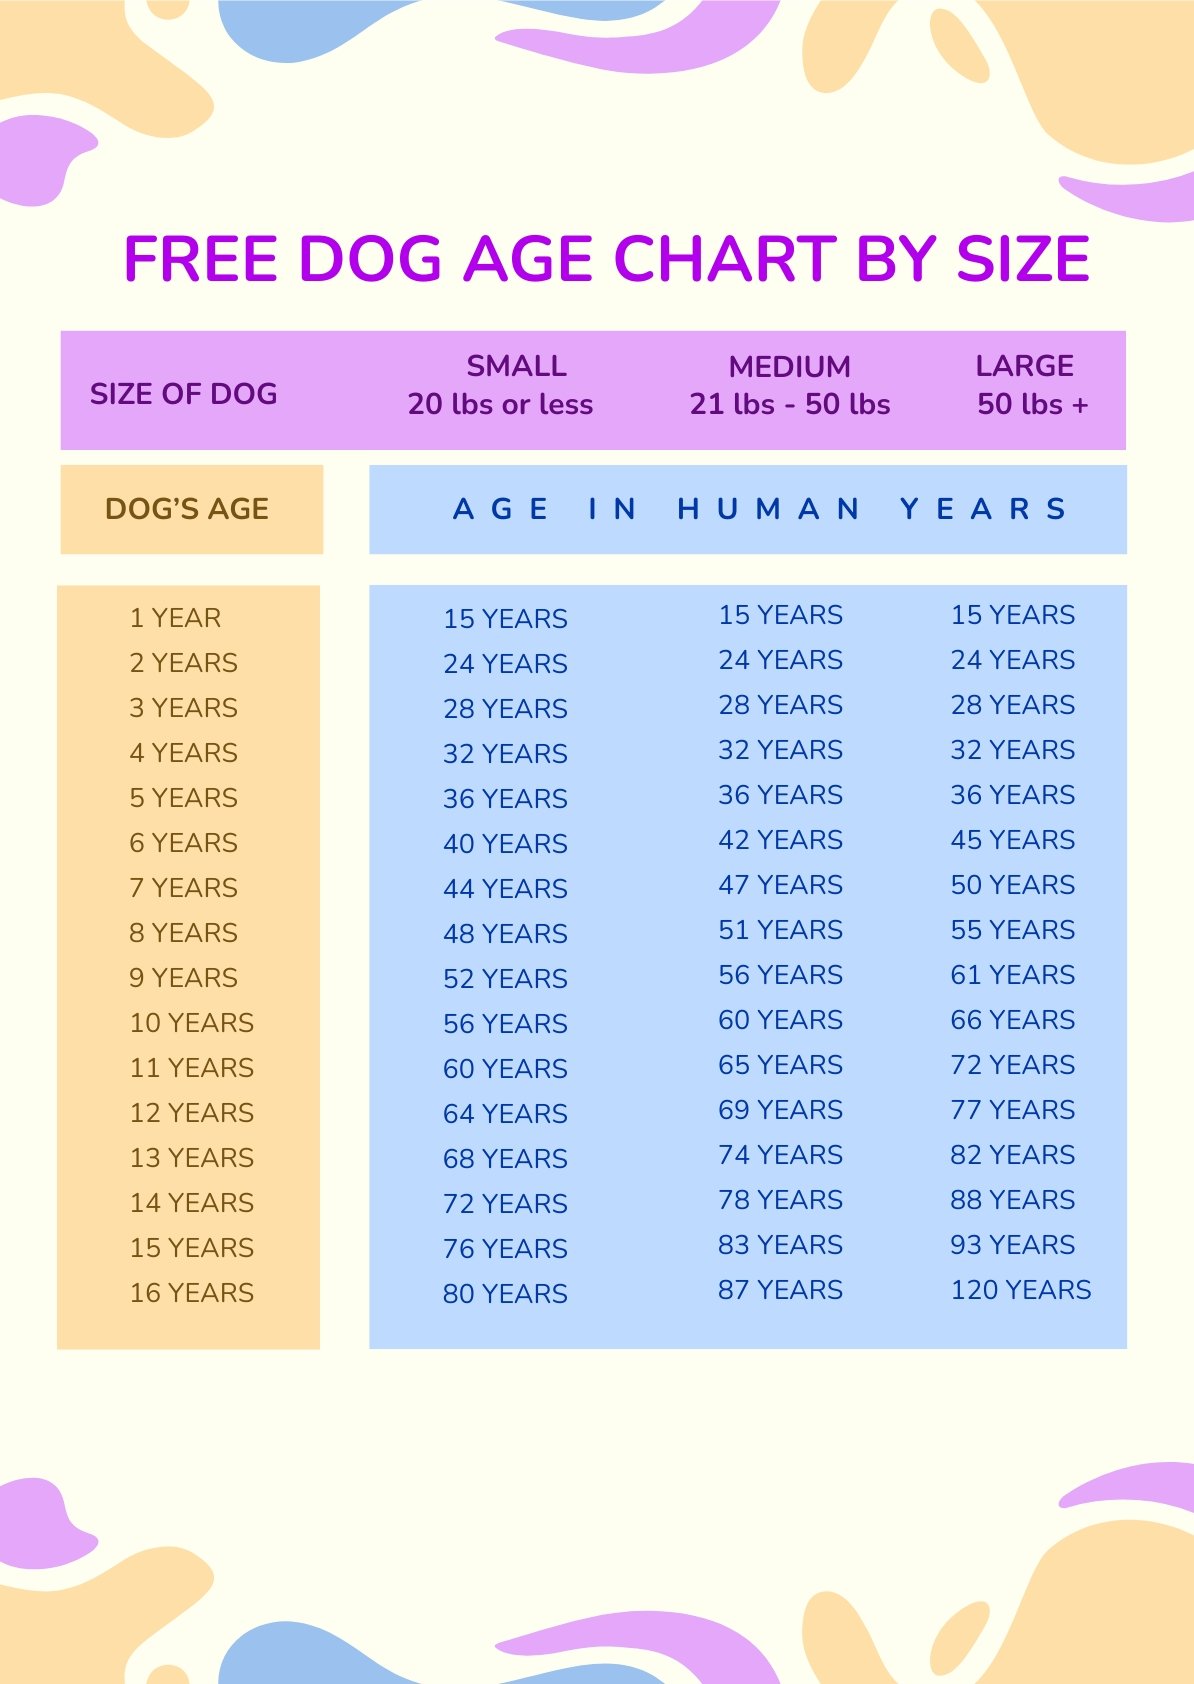 Free Dog Age Chart By Size in PSD